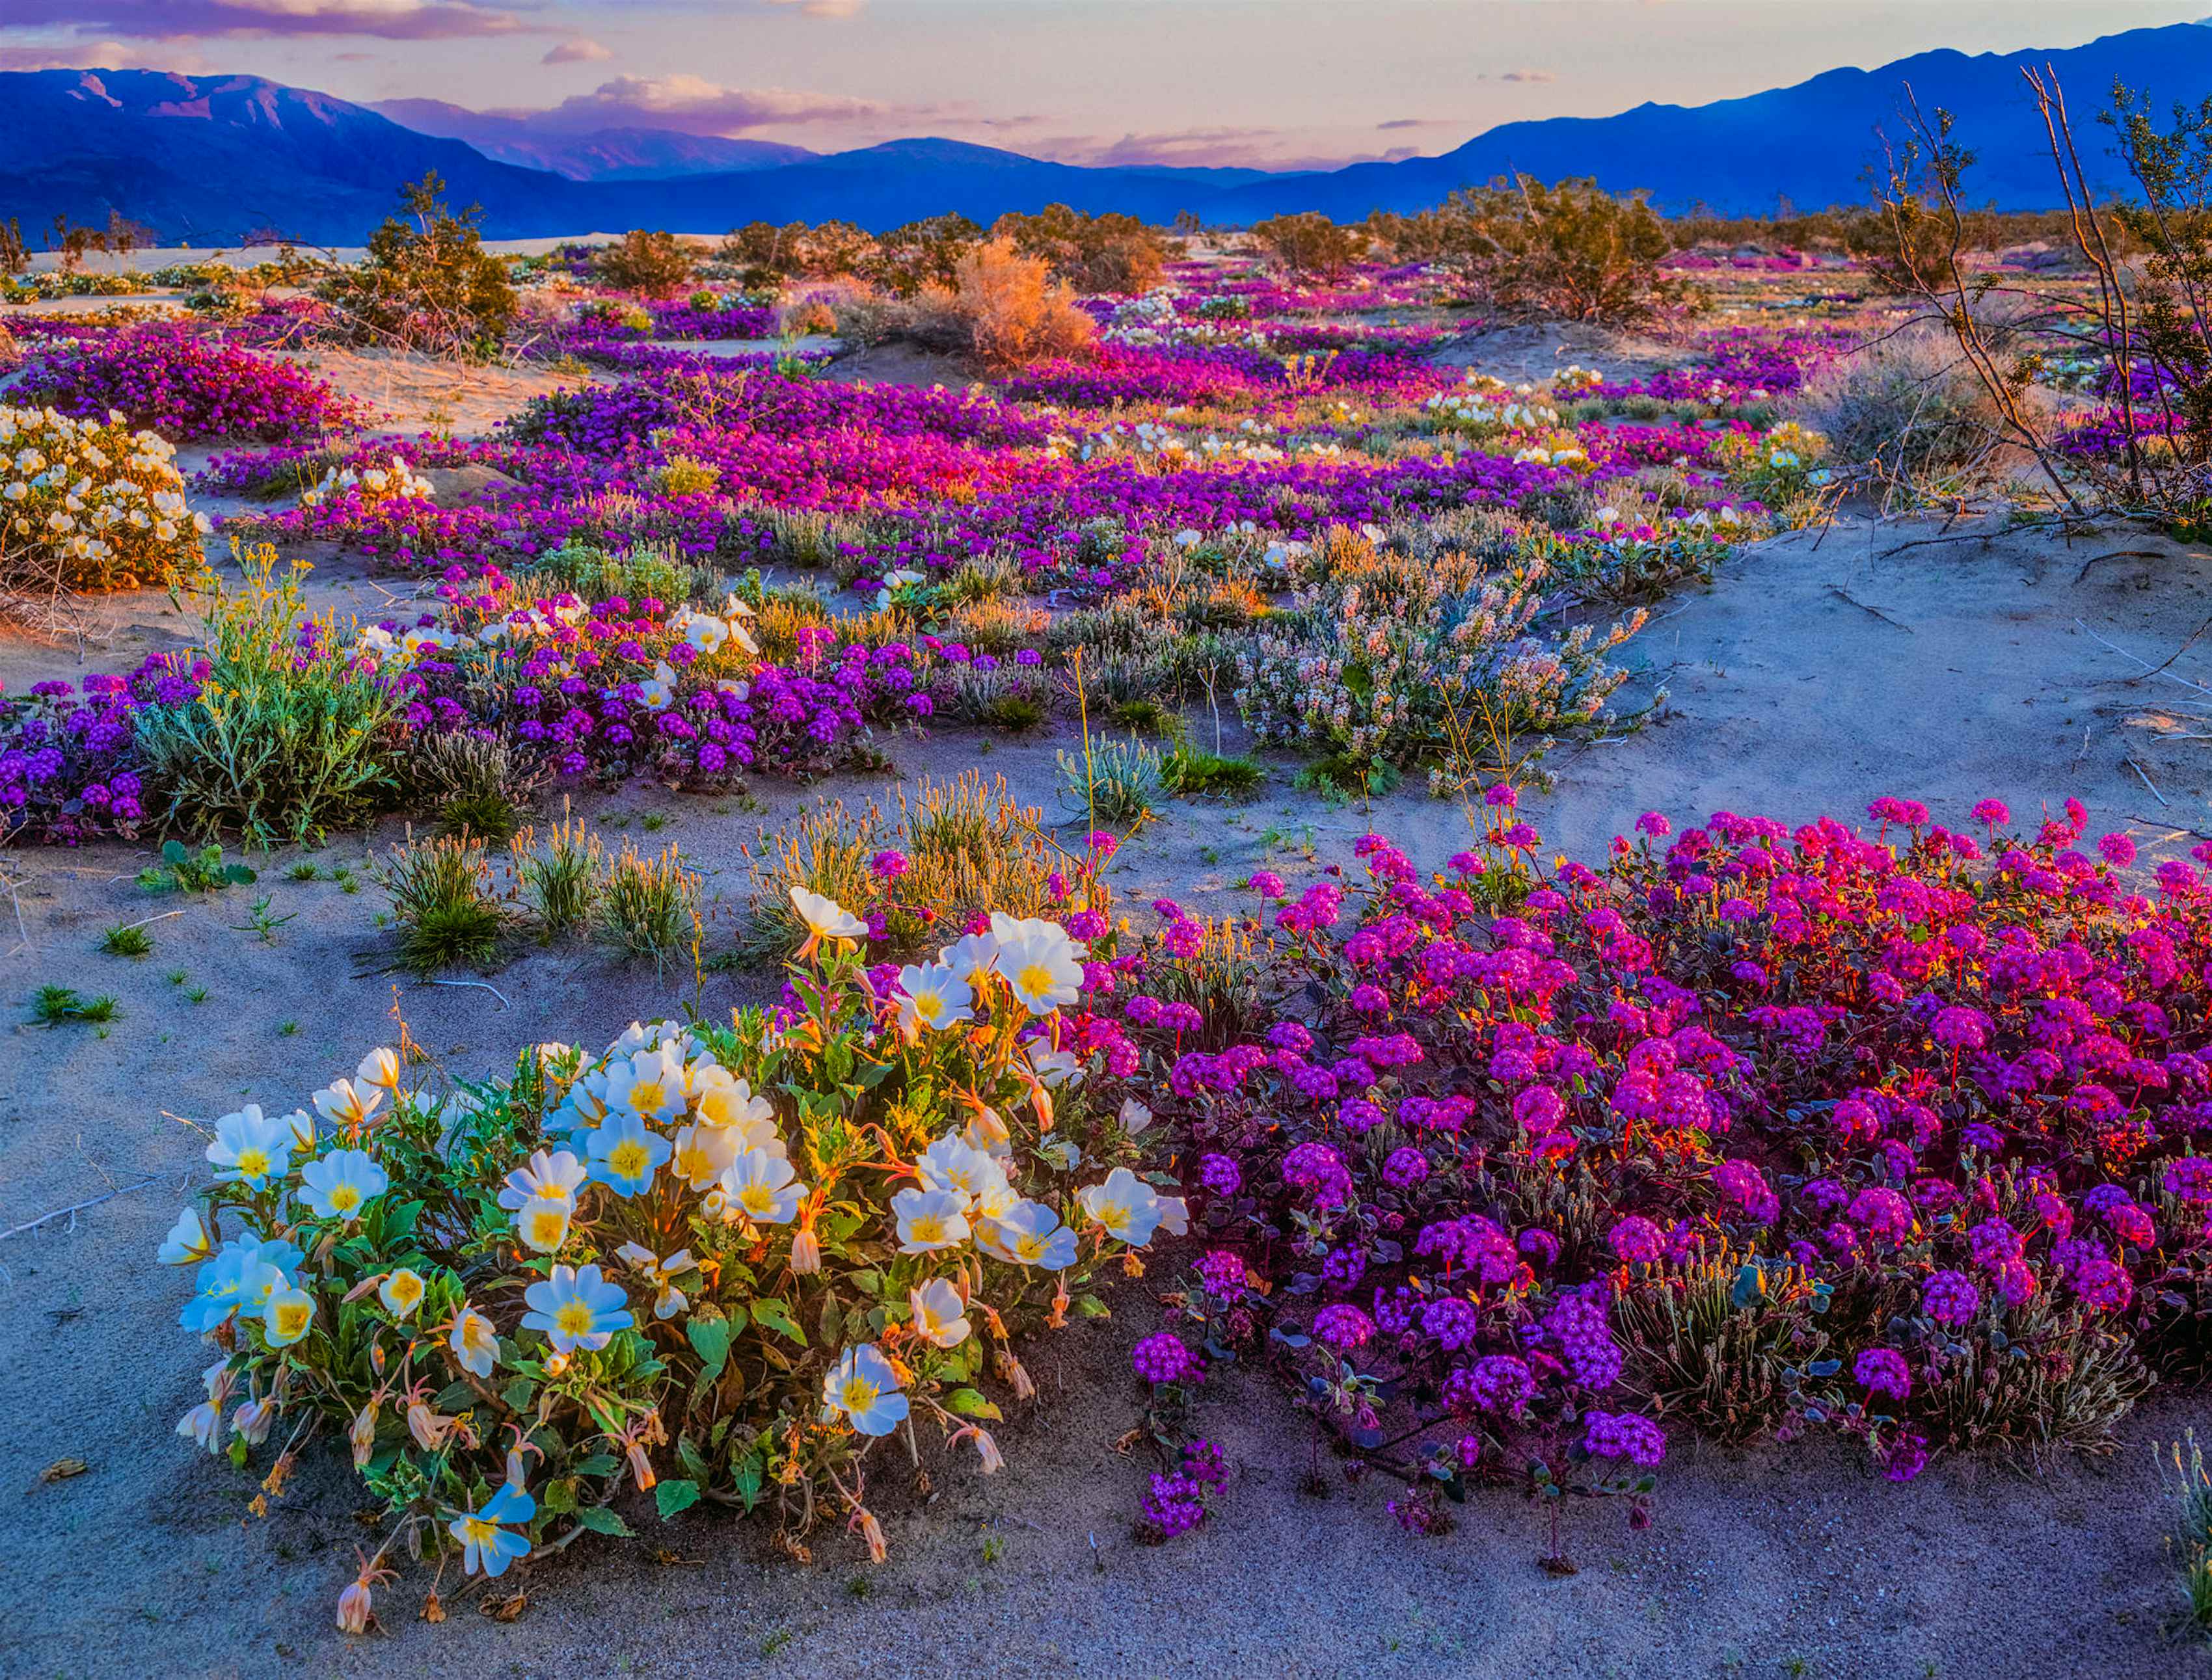 California might be set for another incredible wildflower bloom